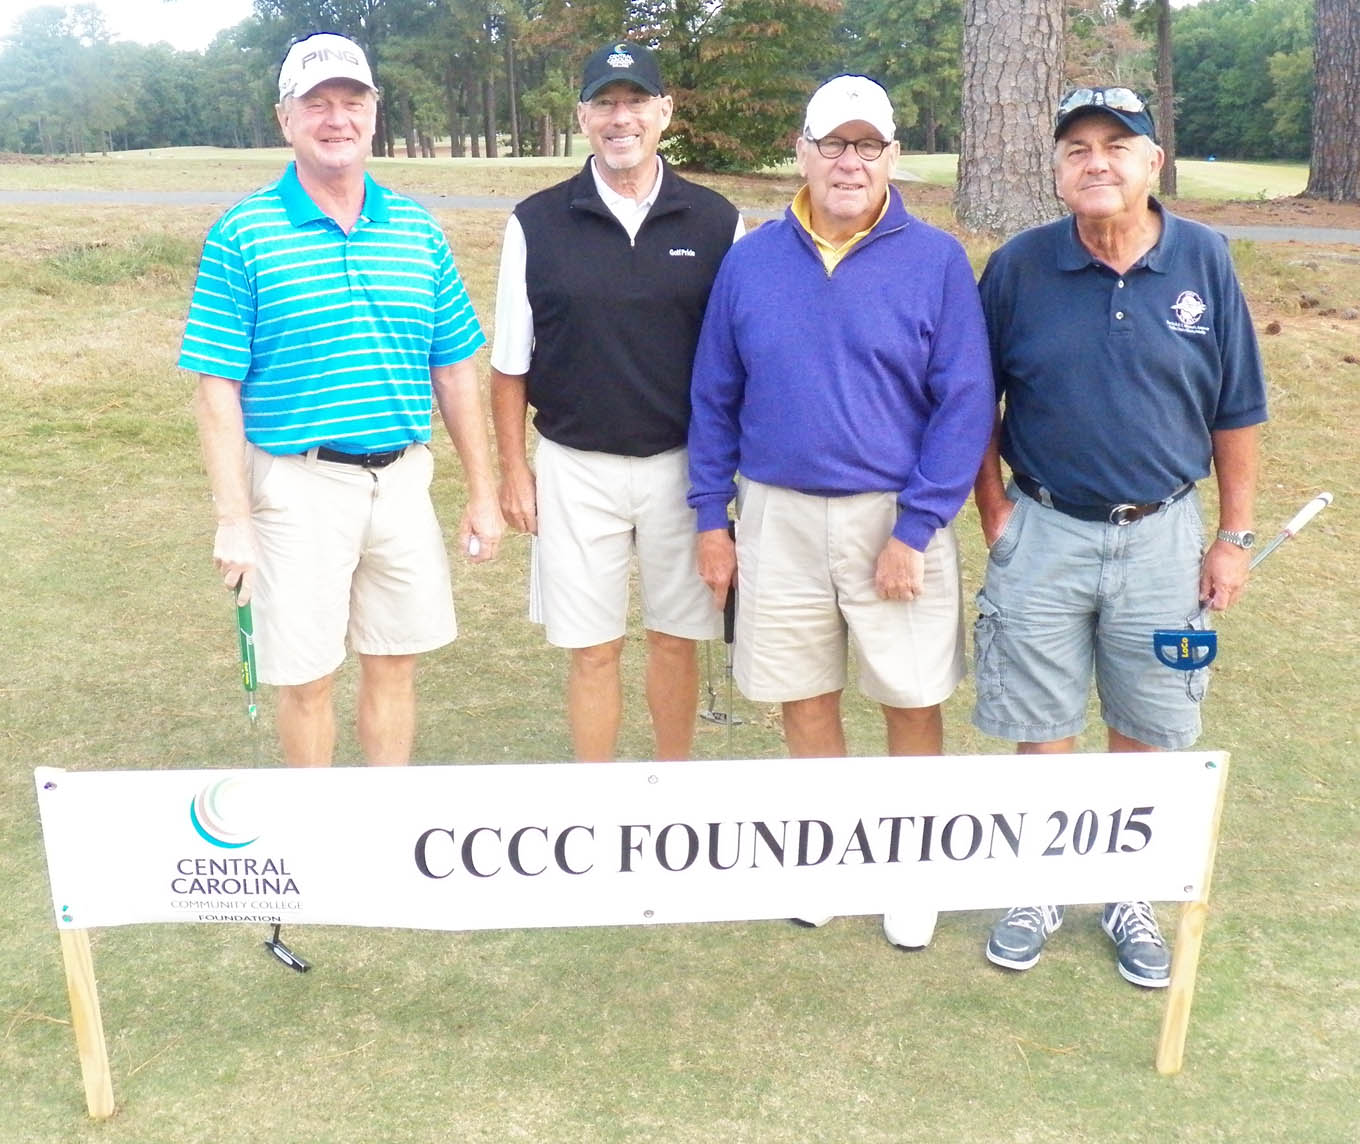 Click to enlarge,  The team of Steve Carter, Rod Brechisen, Jim Ulrich, and Ron Ross won the first flight of the morning tournament of the CCCC Foundation Lee Golf Classic. 